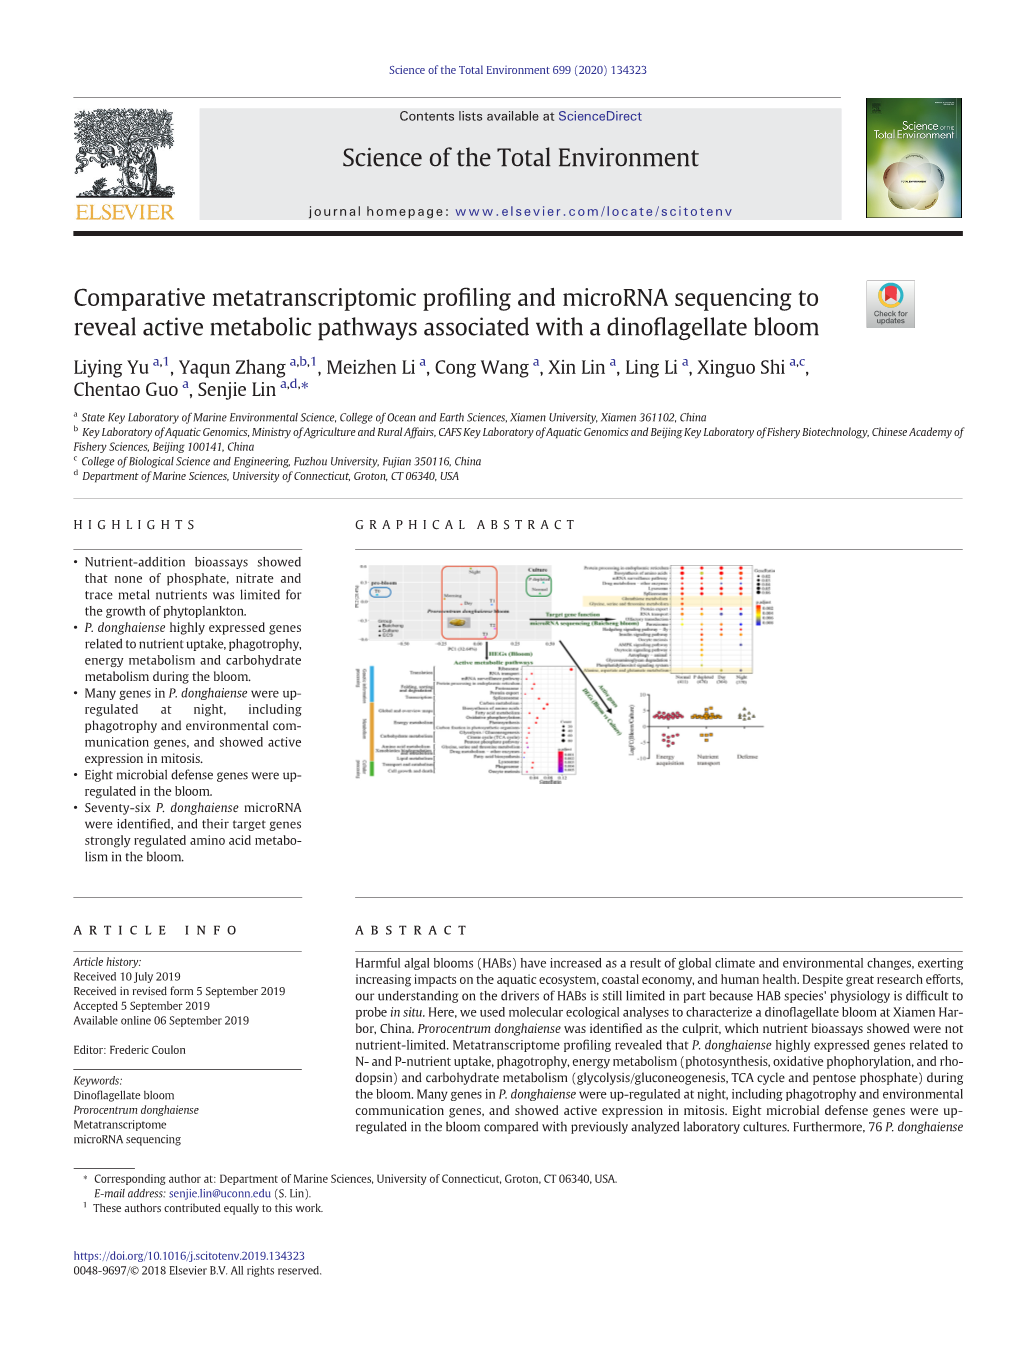 Comparative Metatranscriptomic Profiling and Microrna Sequencing to Reveal Active Metabolic Pathways Associated with a Dinoflage